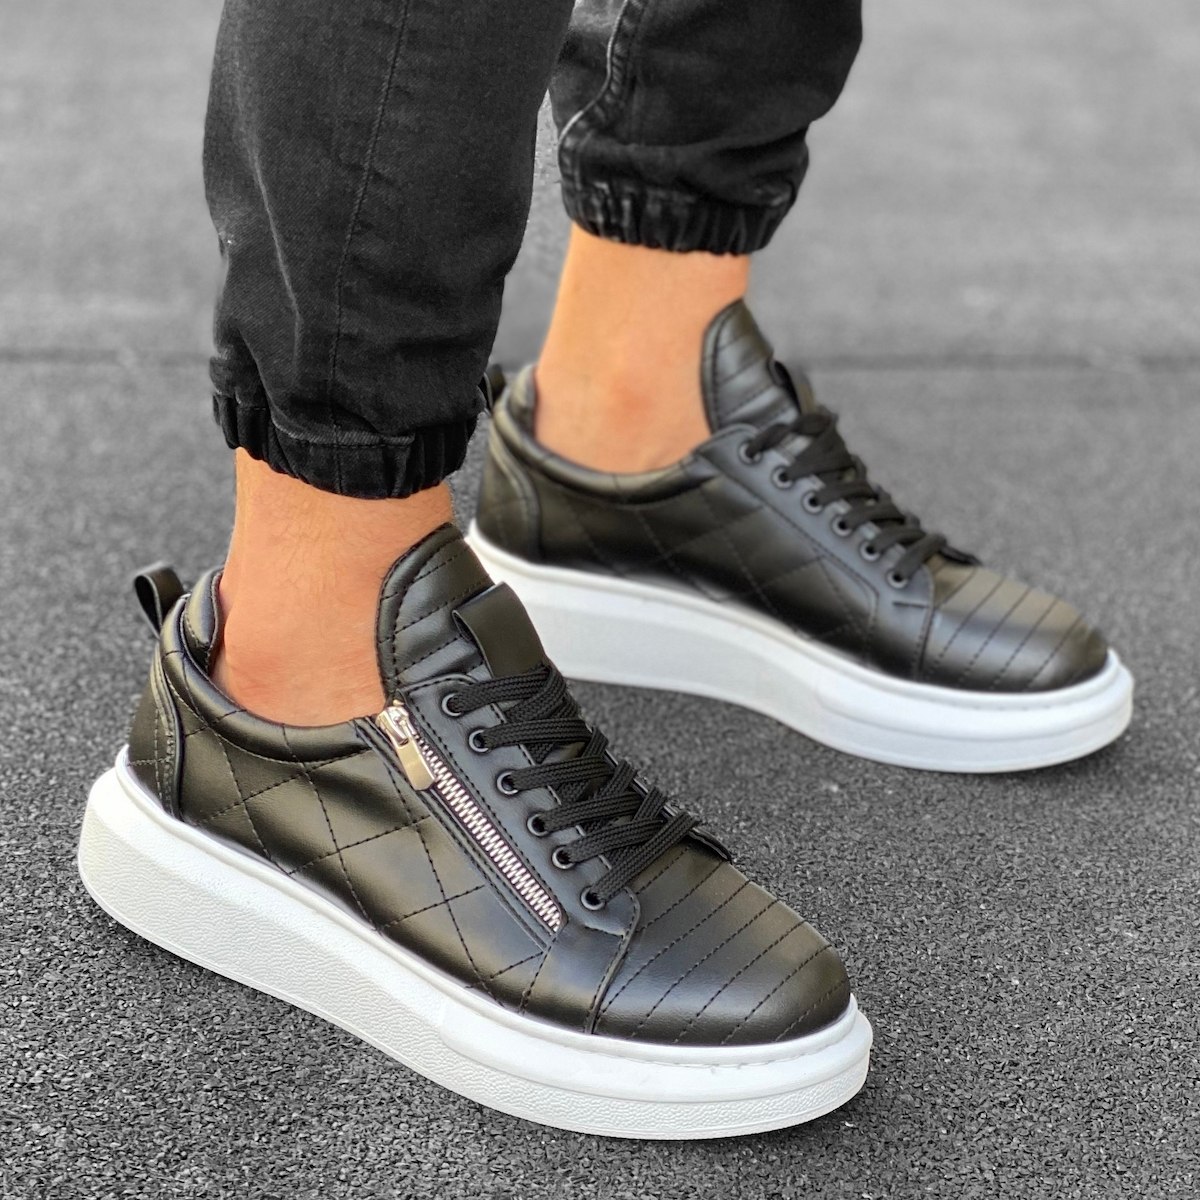 Casual Sneakers With Stitch and Side-zip Design in Black&White | Martin Valen